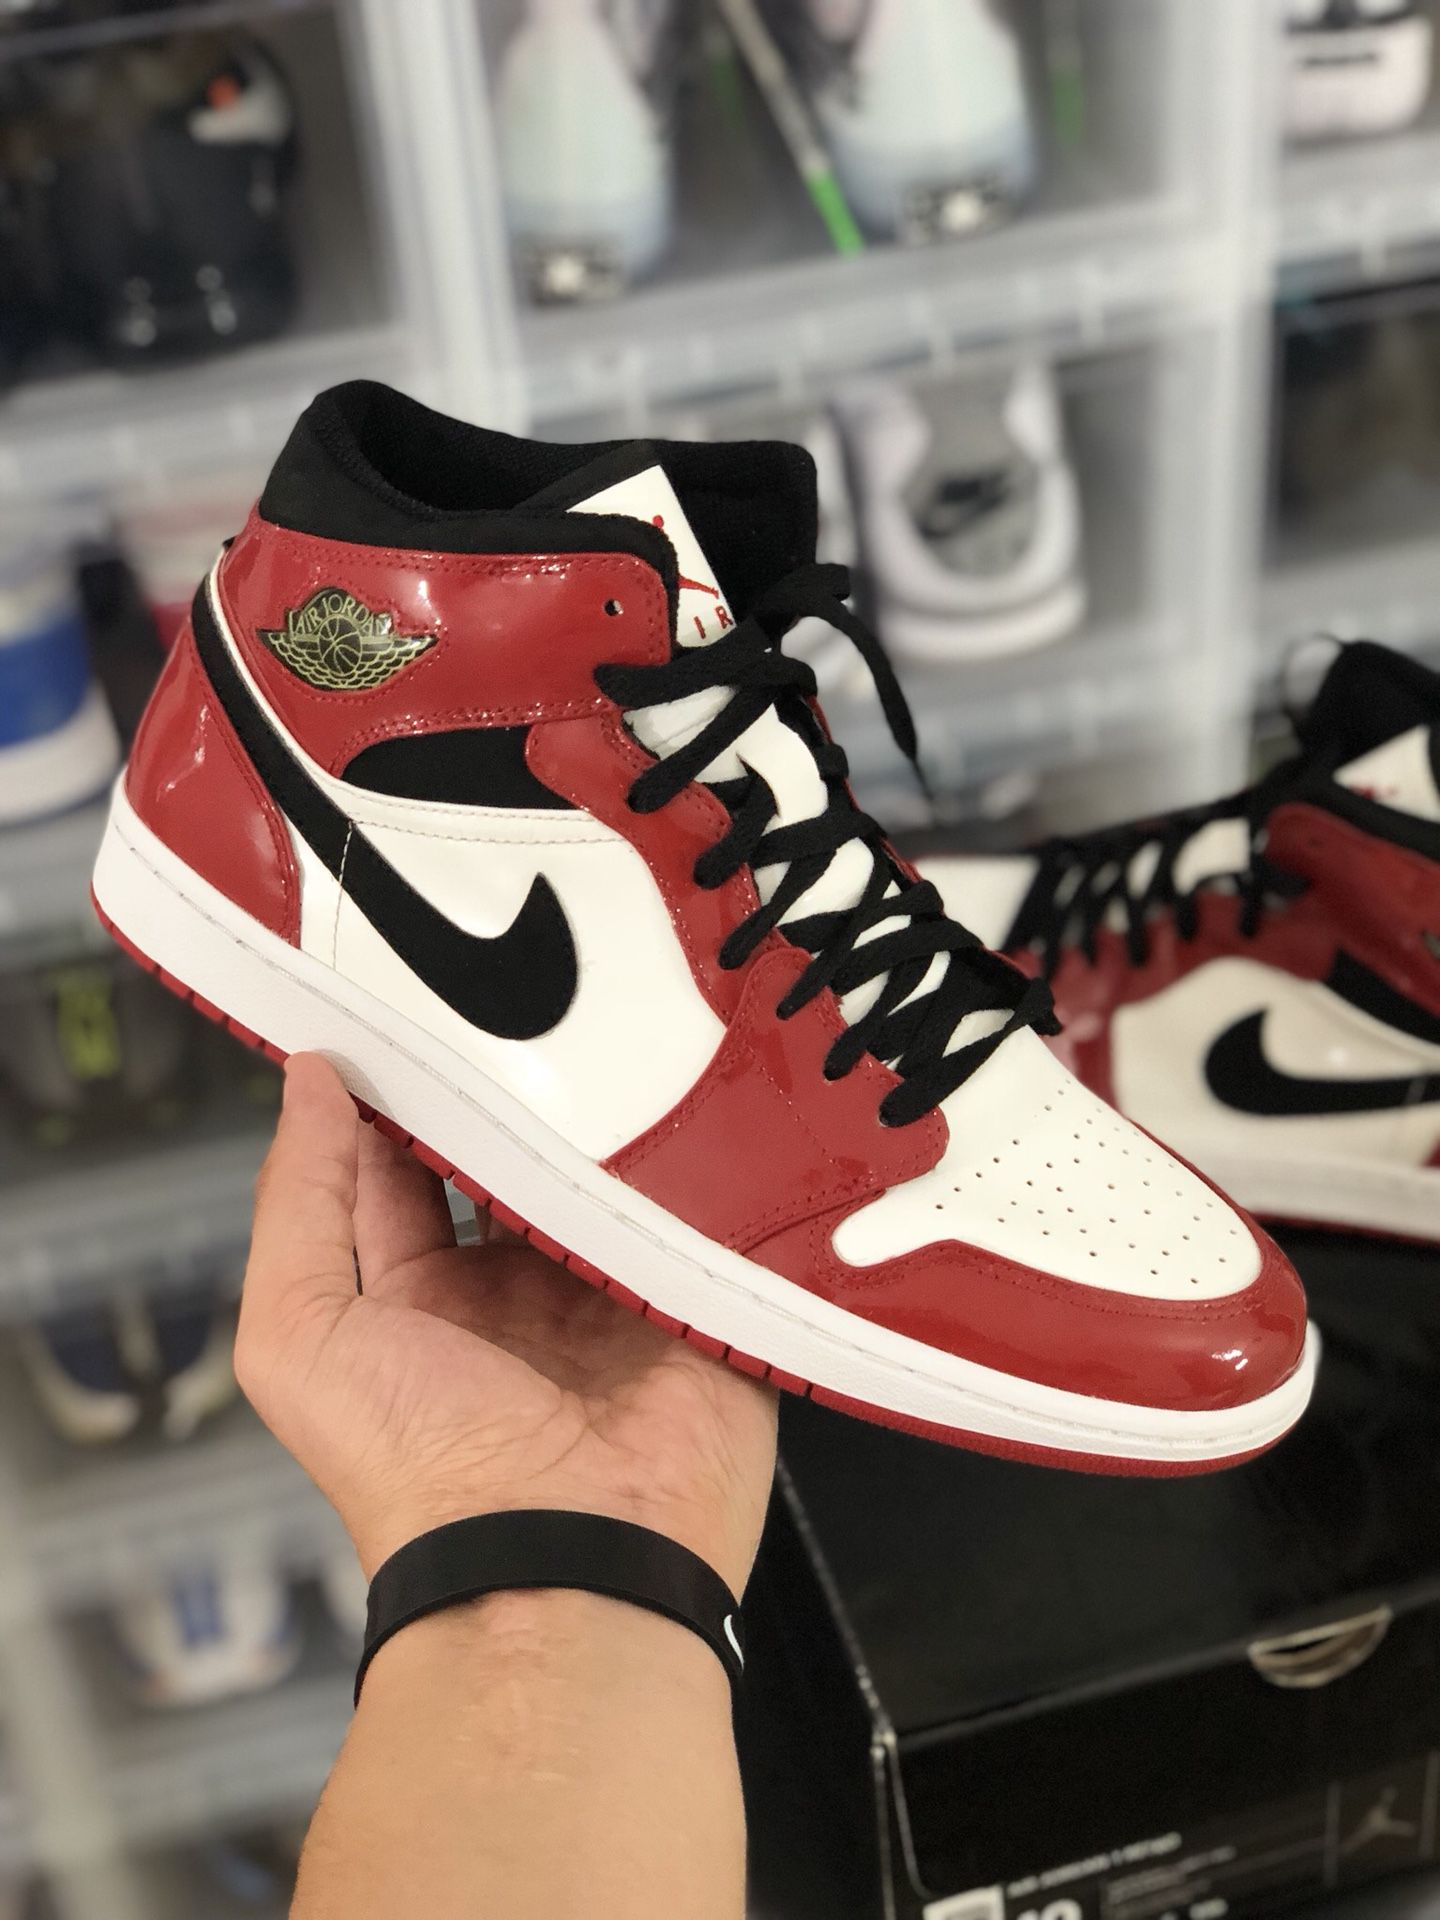 2003 Nike Air Jordan 1 Retro Chicago Patent Leather — Size 10 DS for in Philadelphia, PA - OfferUp